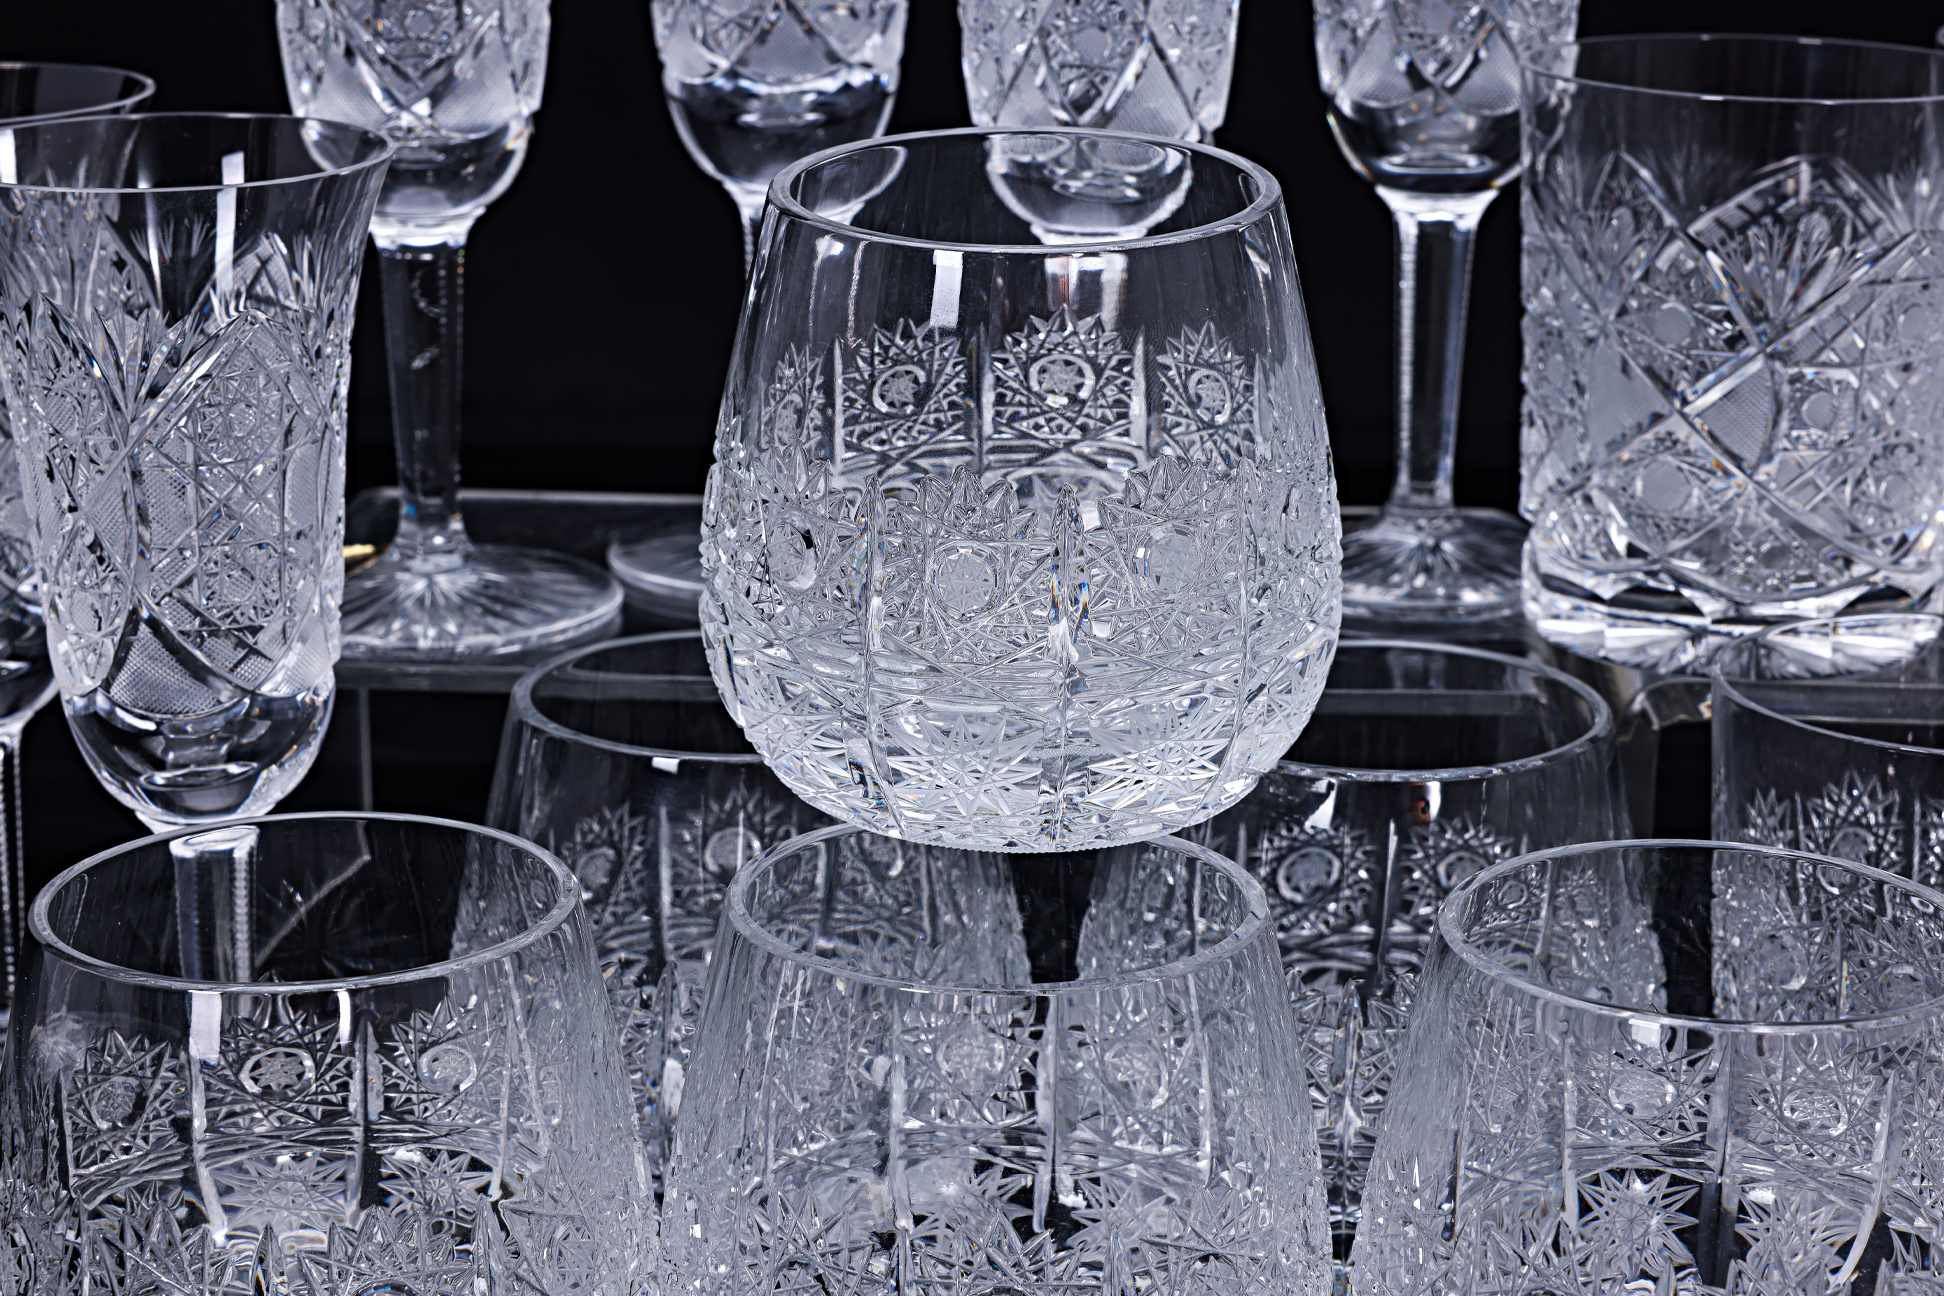 FOUR SETS OF BOHEMIA CRYSTAL GLASSES - Image 4 of 6